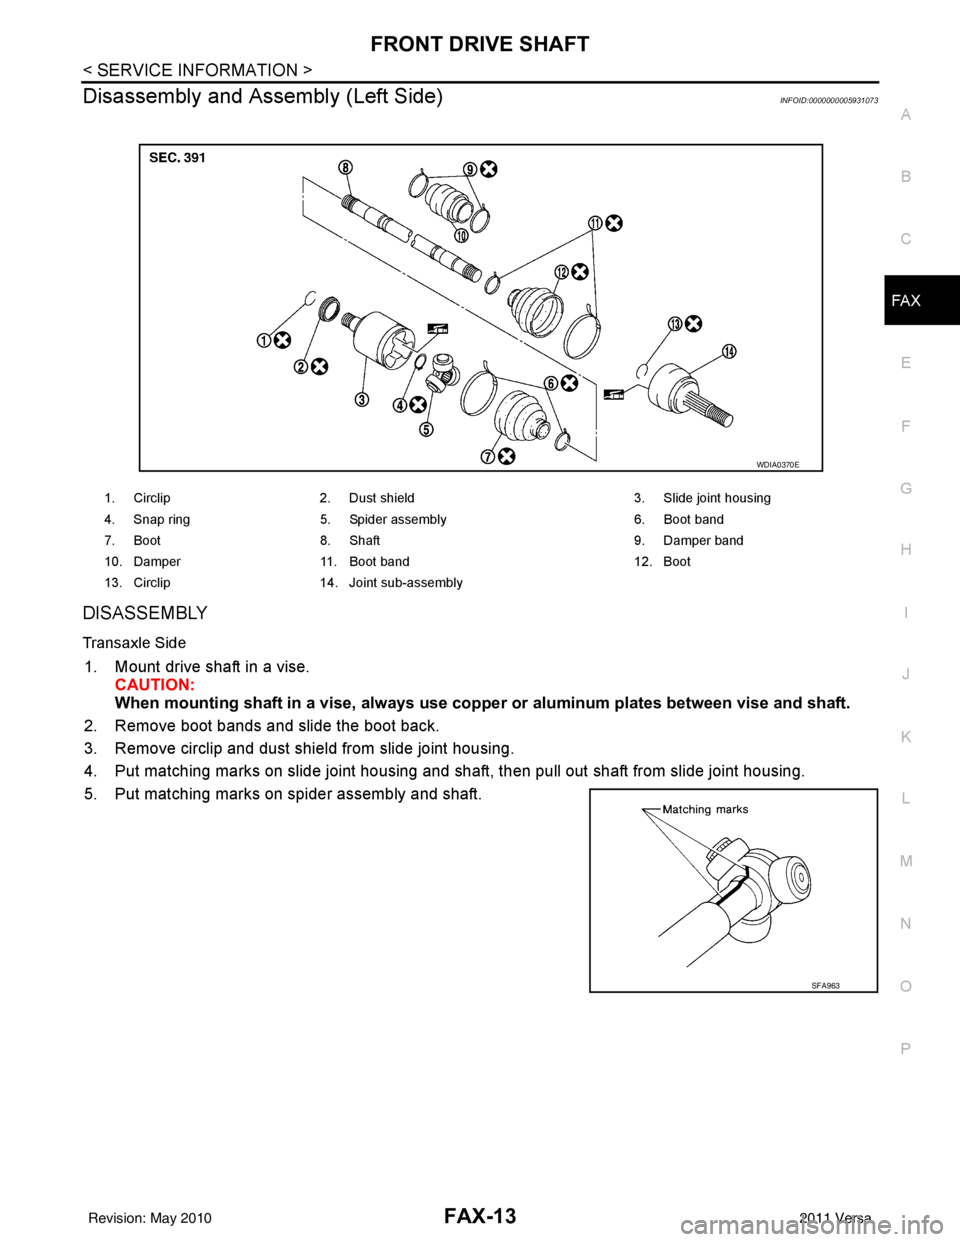 NISSAN LATIO 2011  Service Repair Manual FRONT DRIVE SHAFTFAX-13
< SERVICE INFORMATION >
CEF
G H
I
J
K L
M A
B
FA X
N
O P
Disassembly and Assembly (Left Side)INFOID:0000000005931073
DISASSEMBLY
Transaxle Side
1. Mount drive shaft in a vise. 